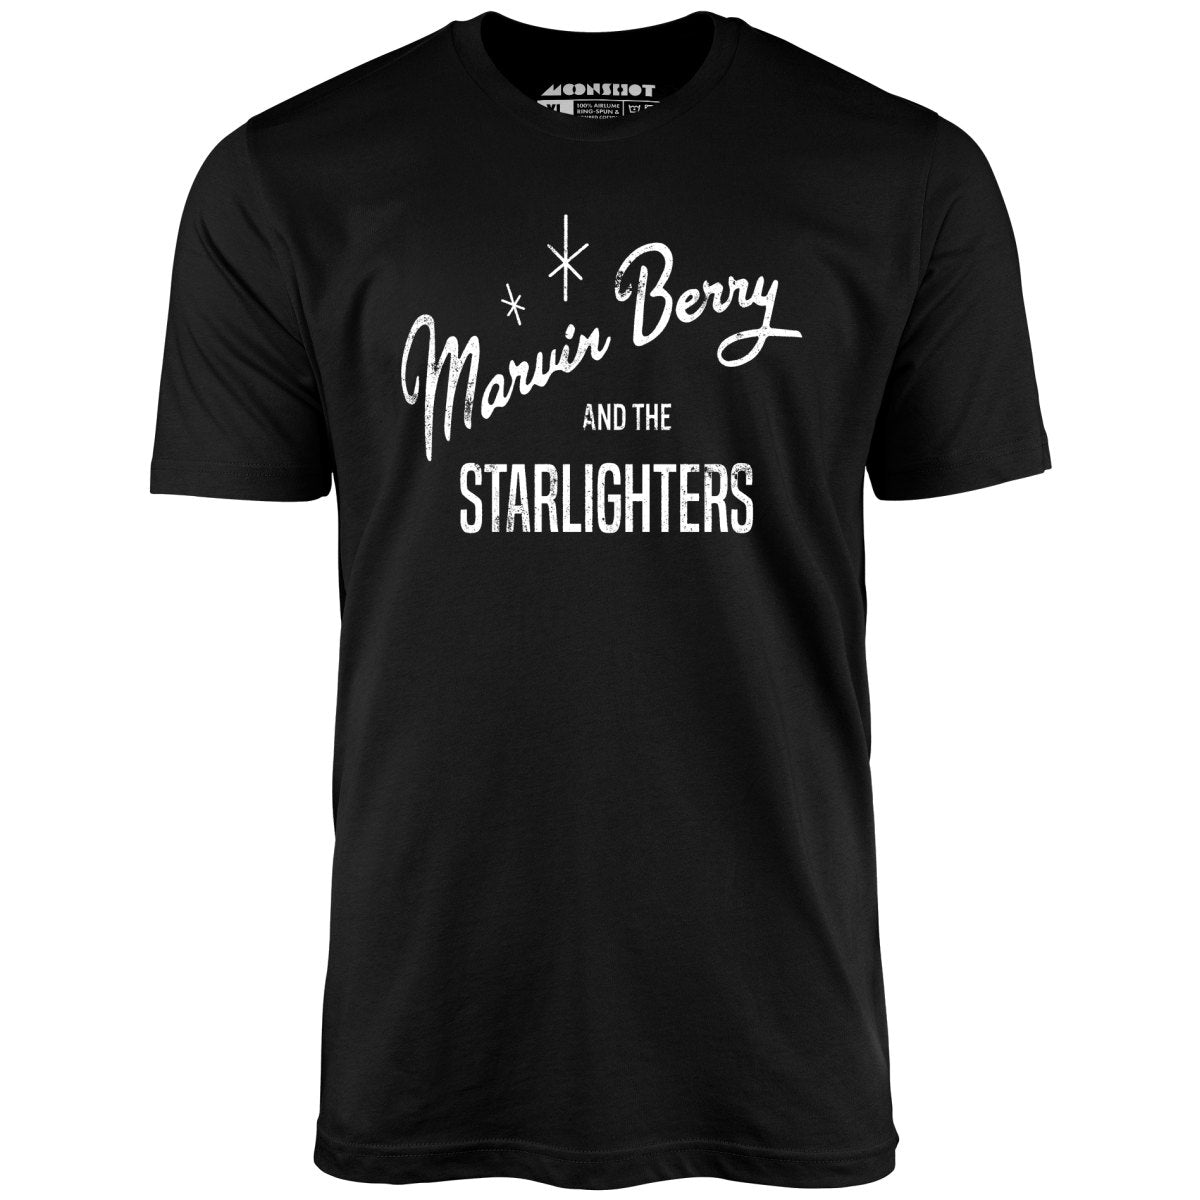 Marvin Berry and The Starlighters - Unisex T-Shirt